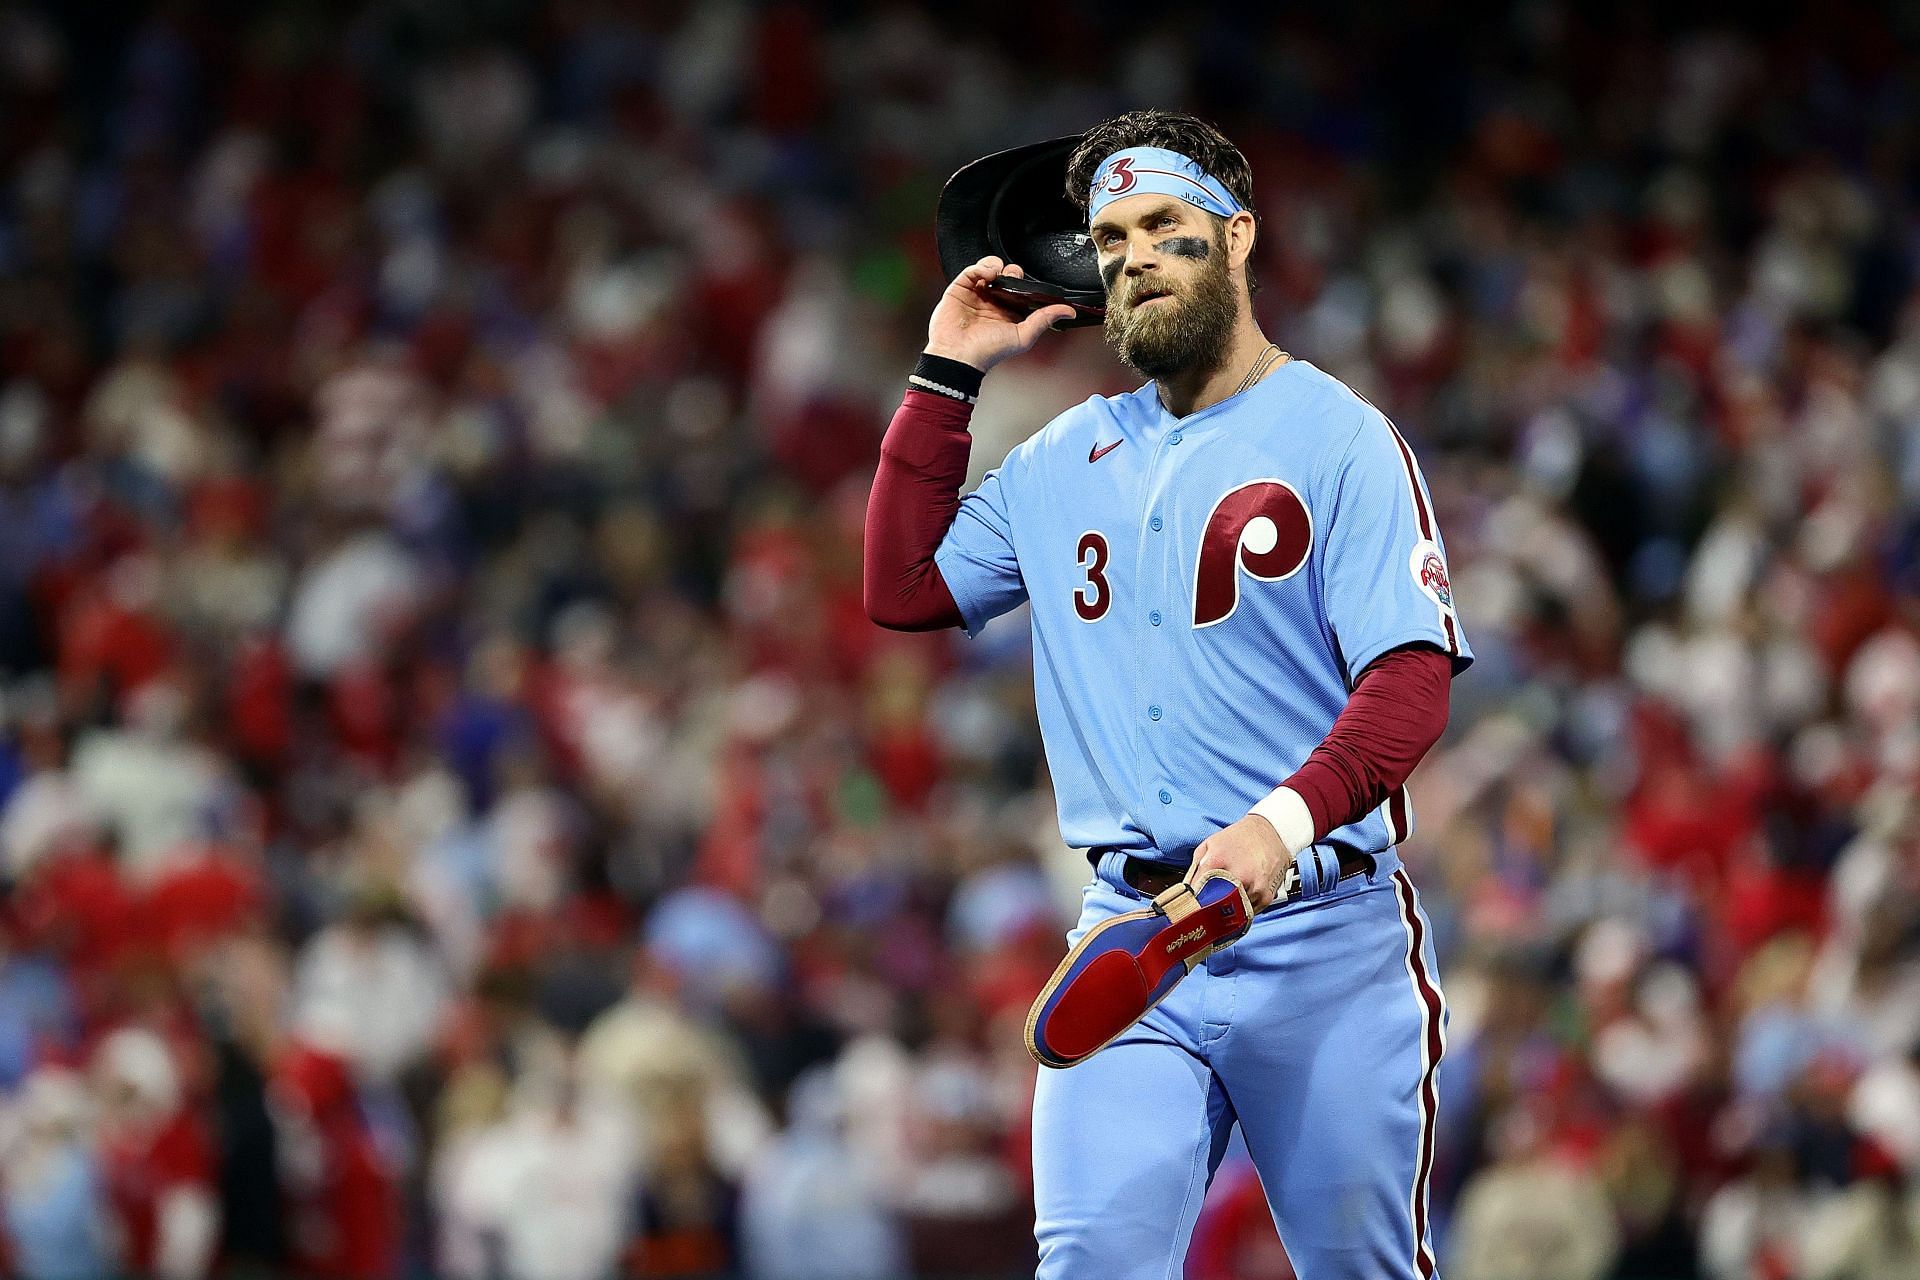 Bryce Harper lifted his team to the World Series for the first time in his career.